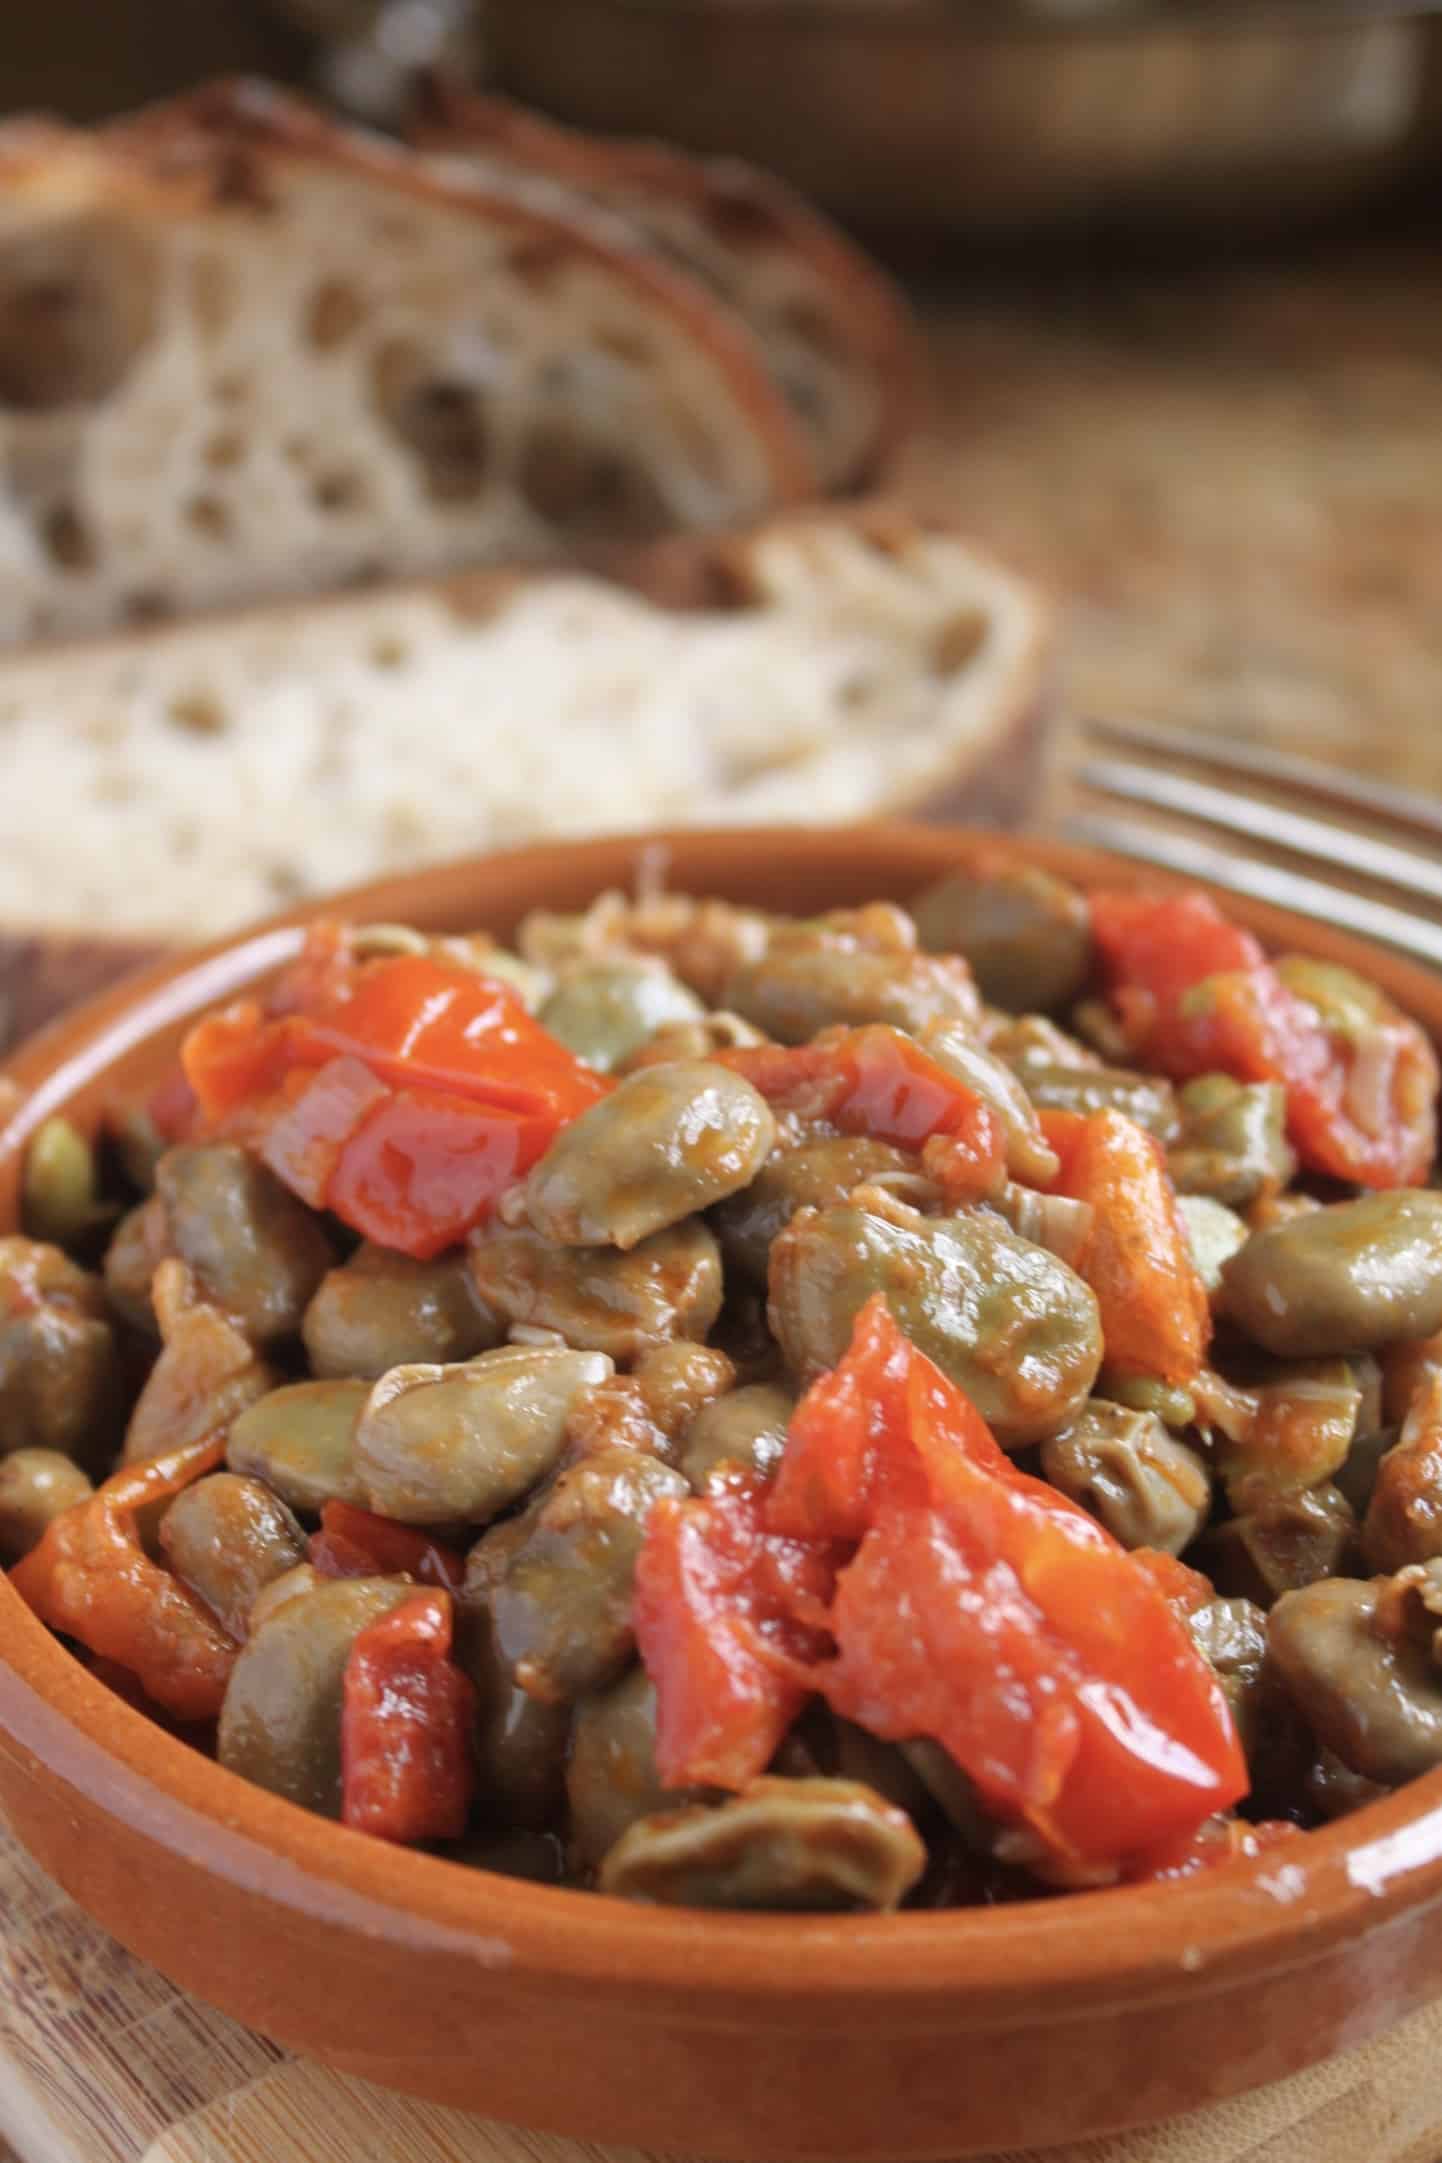 fava beans and tomatoes in a bowl with bread